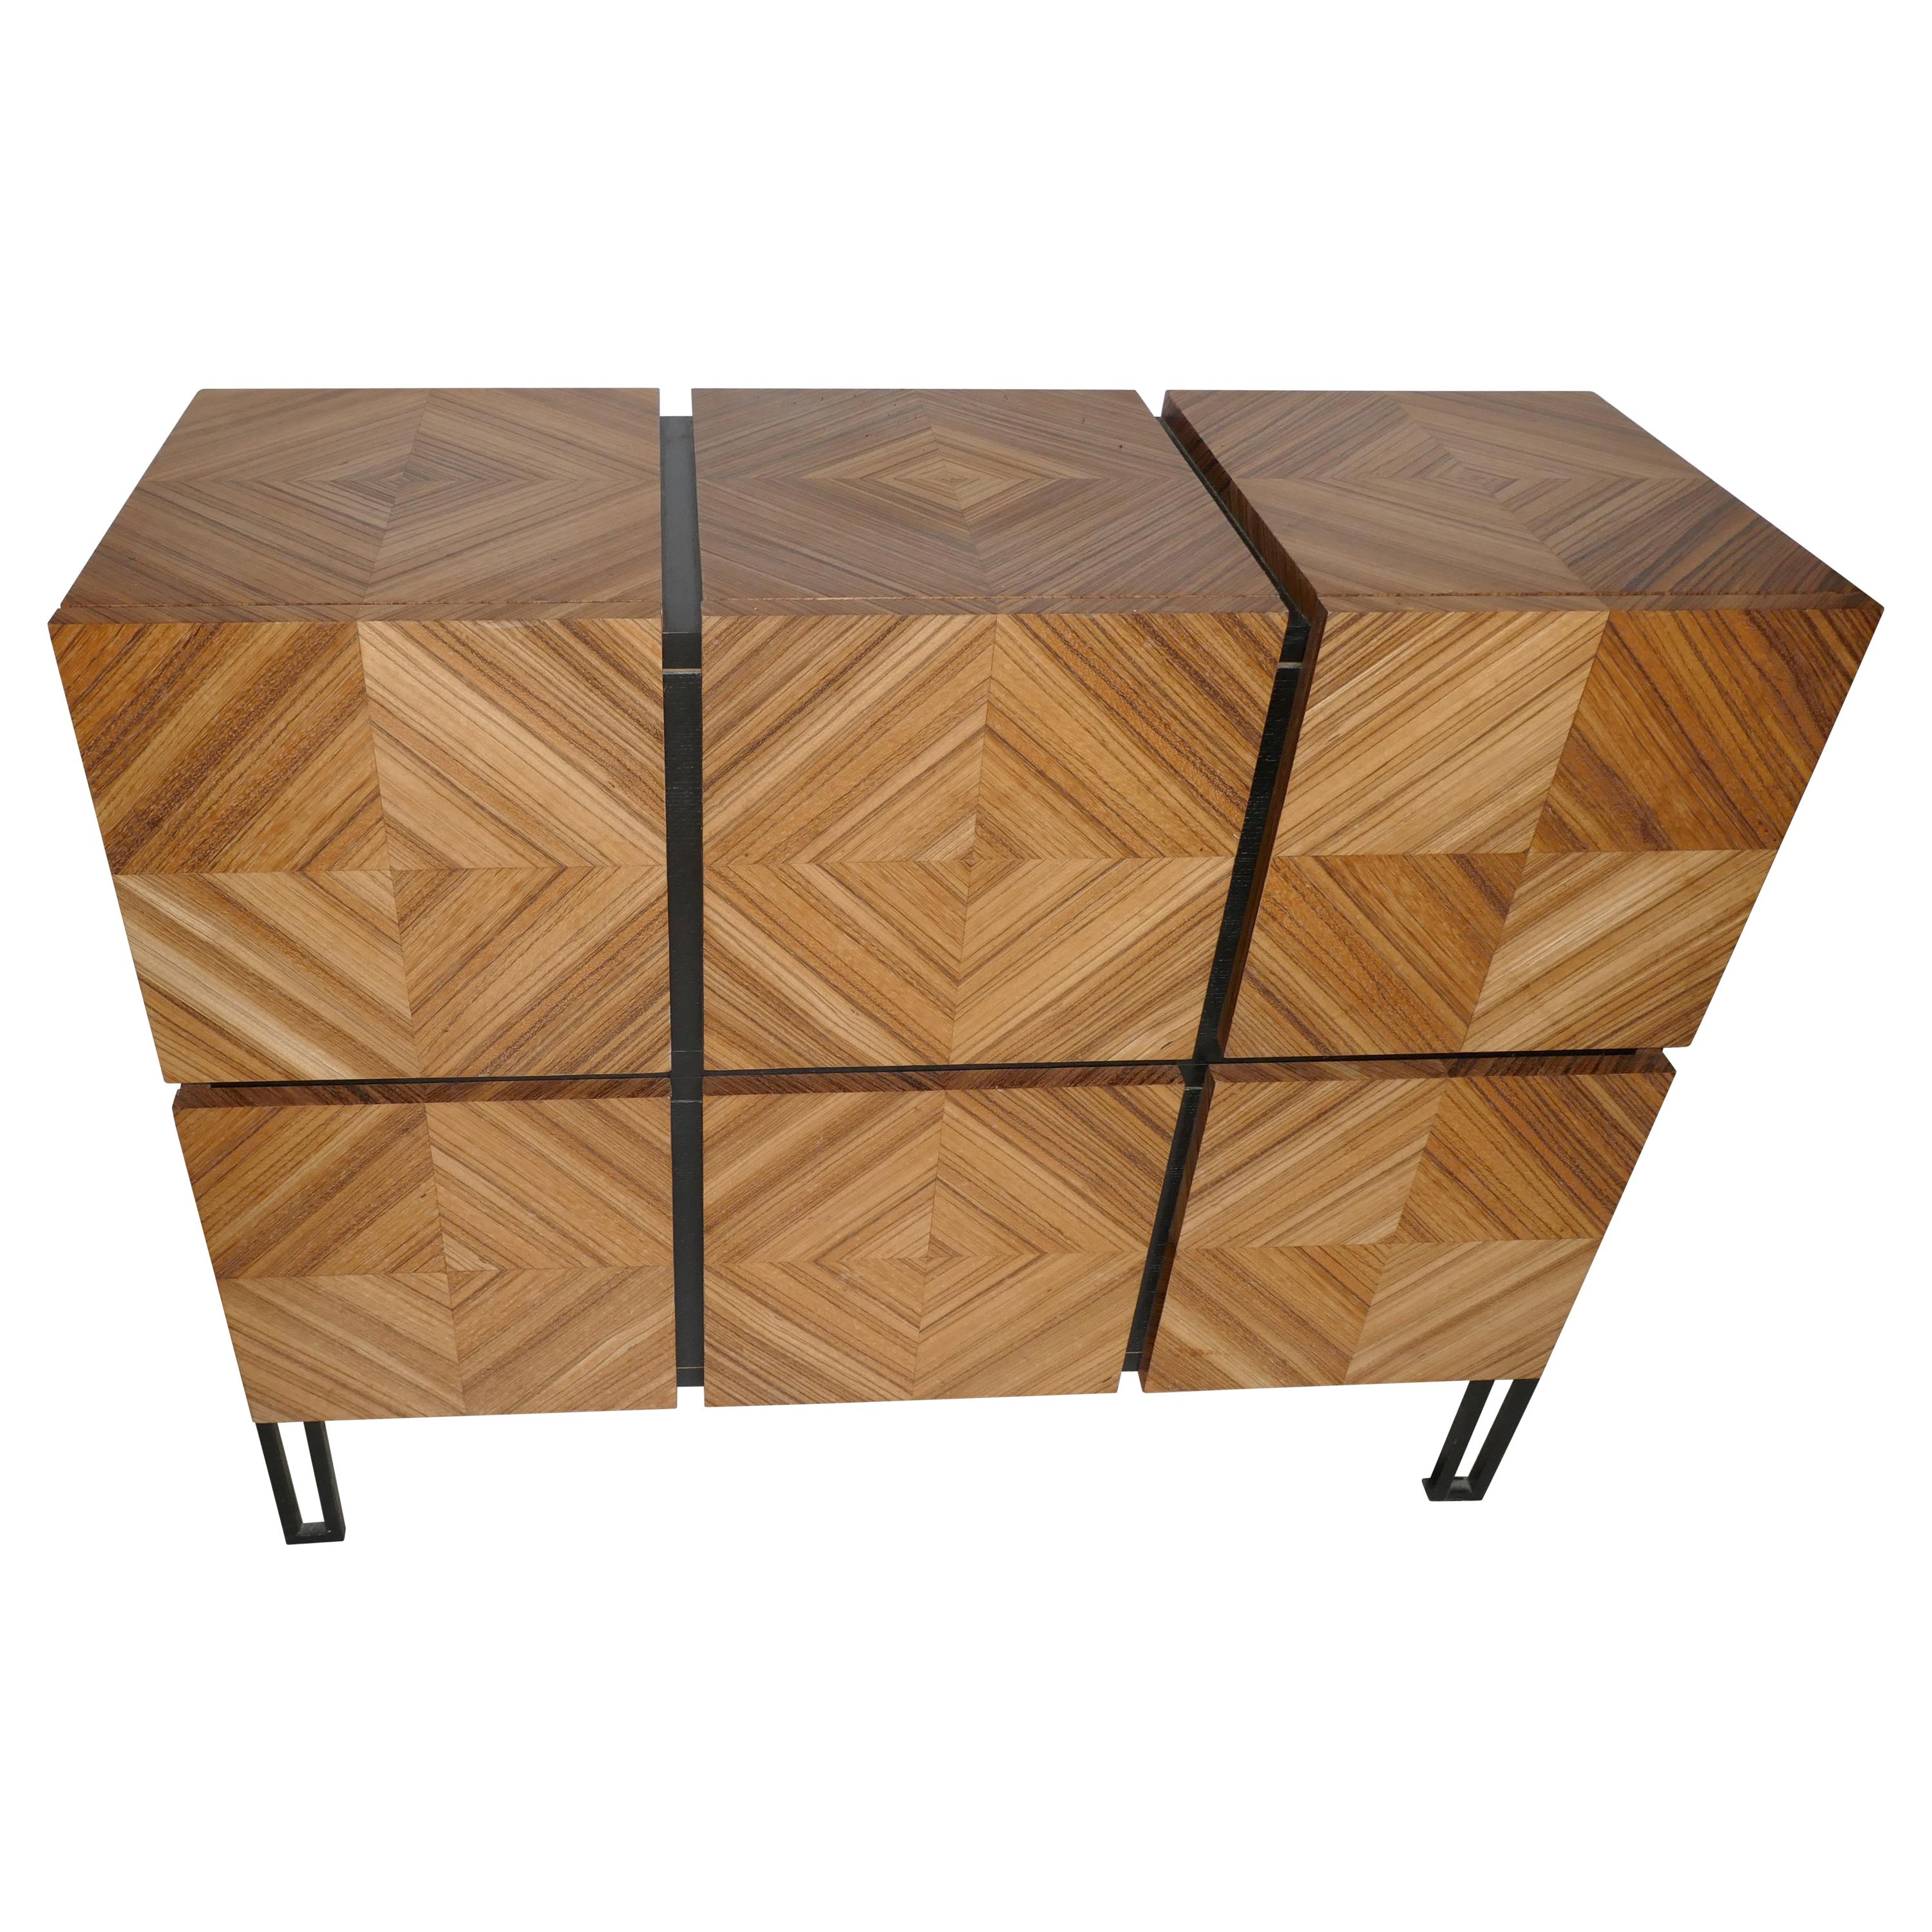 Chest of Drawers "Losange" in Zebrano Open Is Tow Drawers For Sale